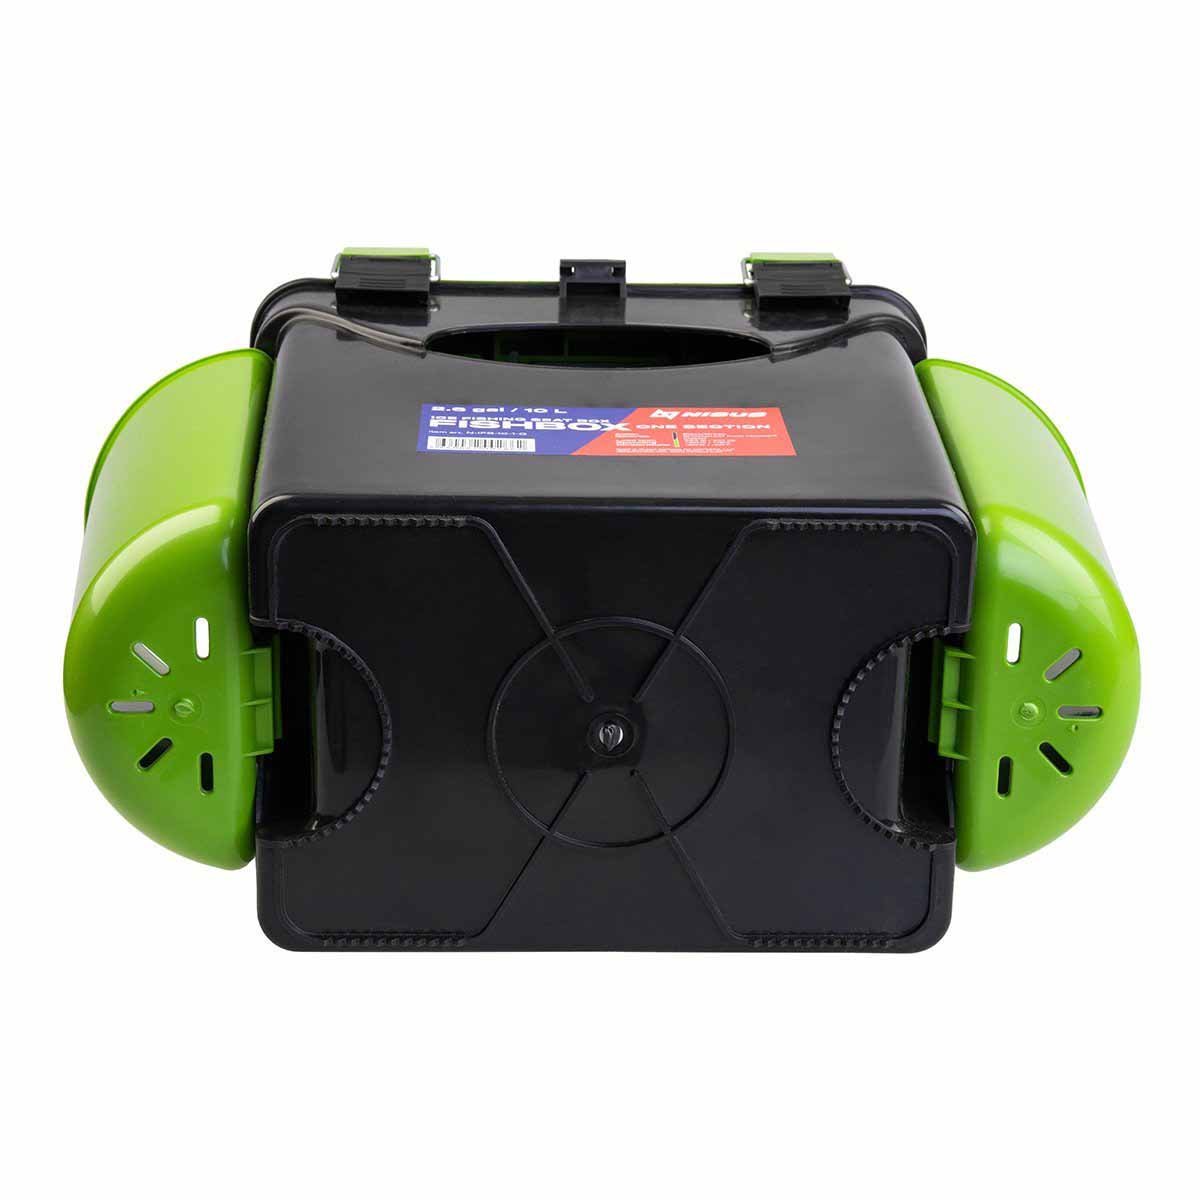 FishBox 10 liter SeatBox for Ice Fishing Tackle and Gear, green, bottom view